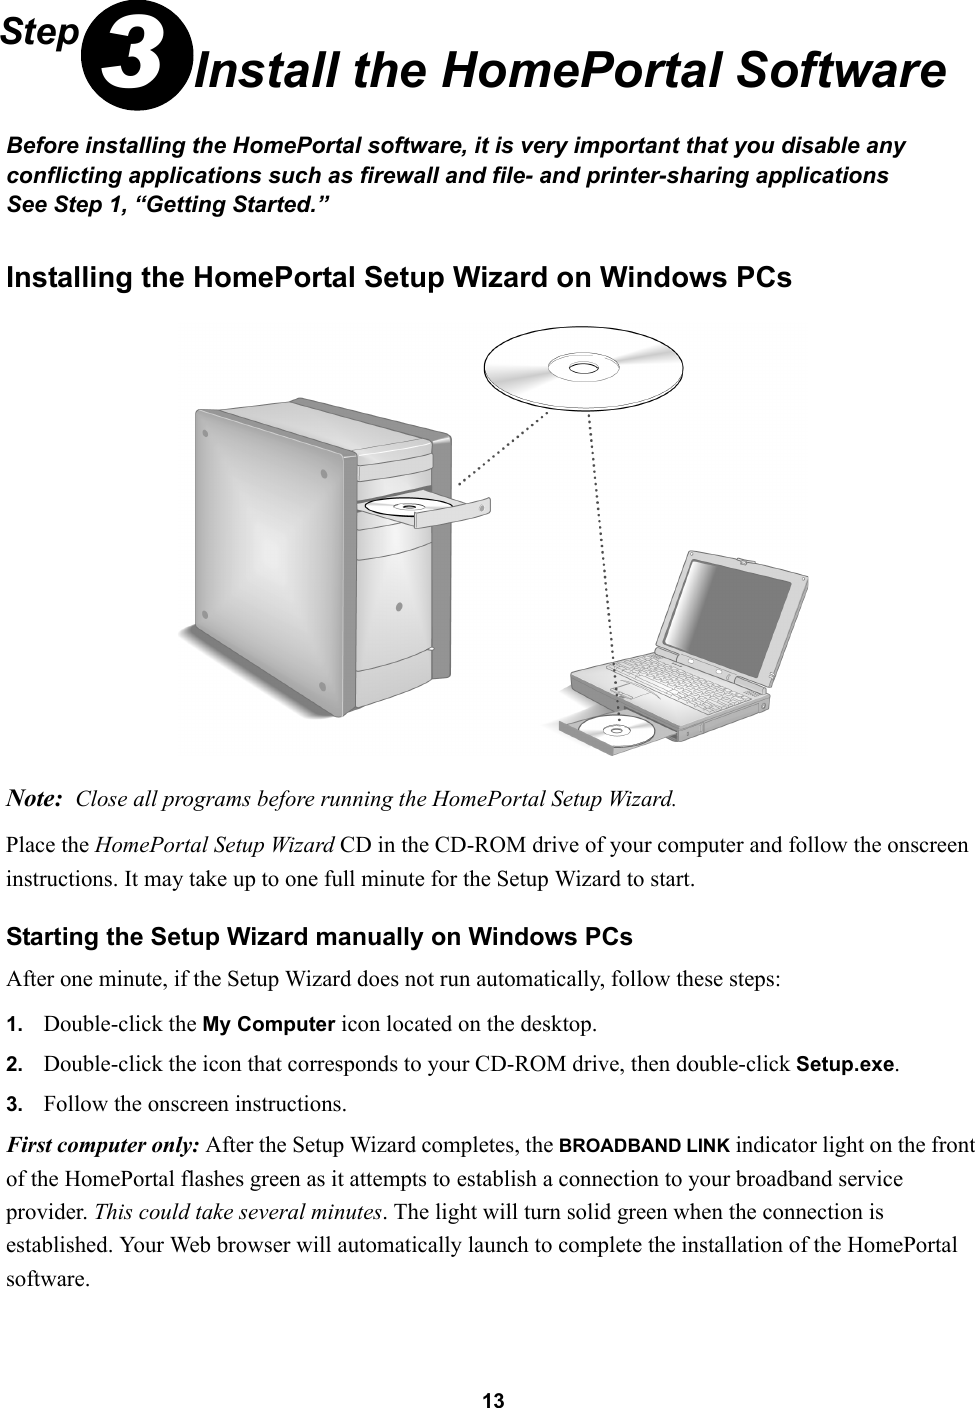 13Step 3Install the HomePortal SoftwareBefore installing the HomePortal software, it is very important that you disable any conflicting applications such as firewall and file- and printer-sharing applicationsSee Step 1, “Getting Started.”Installing the HomePortal Setup Wizard on Windows PCs Note: Close all programs before running the HomePortal Setup Wizard.Place the HomePortal Setup Wizard CD in the CD-ROM drive of your computer and follow the onscreen instructions. It may take up to one full minute for the Setup Wizard to start.Starting the Setup Wizard manually on Windows PCsAfter one minute, if the Setup Wizard does not run automatically, follow these steps:1. Double-click the My Computer icon located on the desktop.2. Double-click the icon that corresponds to your CD-ROM drive, then double-click Setup.exe.3. Follow the onscreen instructions.First computer only: After the Setup Wizard completes, the BROADBAND LINK indicator light on the front of the HomePortal flashes green as it attempts to establish a connection to your broadband service provider. This could take several minutes. The light will turn solid green when the connection is established. Your Web browser will automatically launch to complete the installation of the HomePortal software.